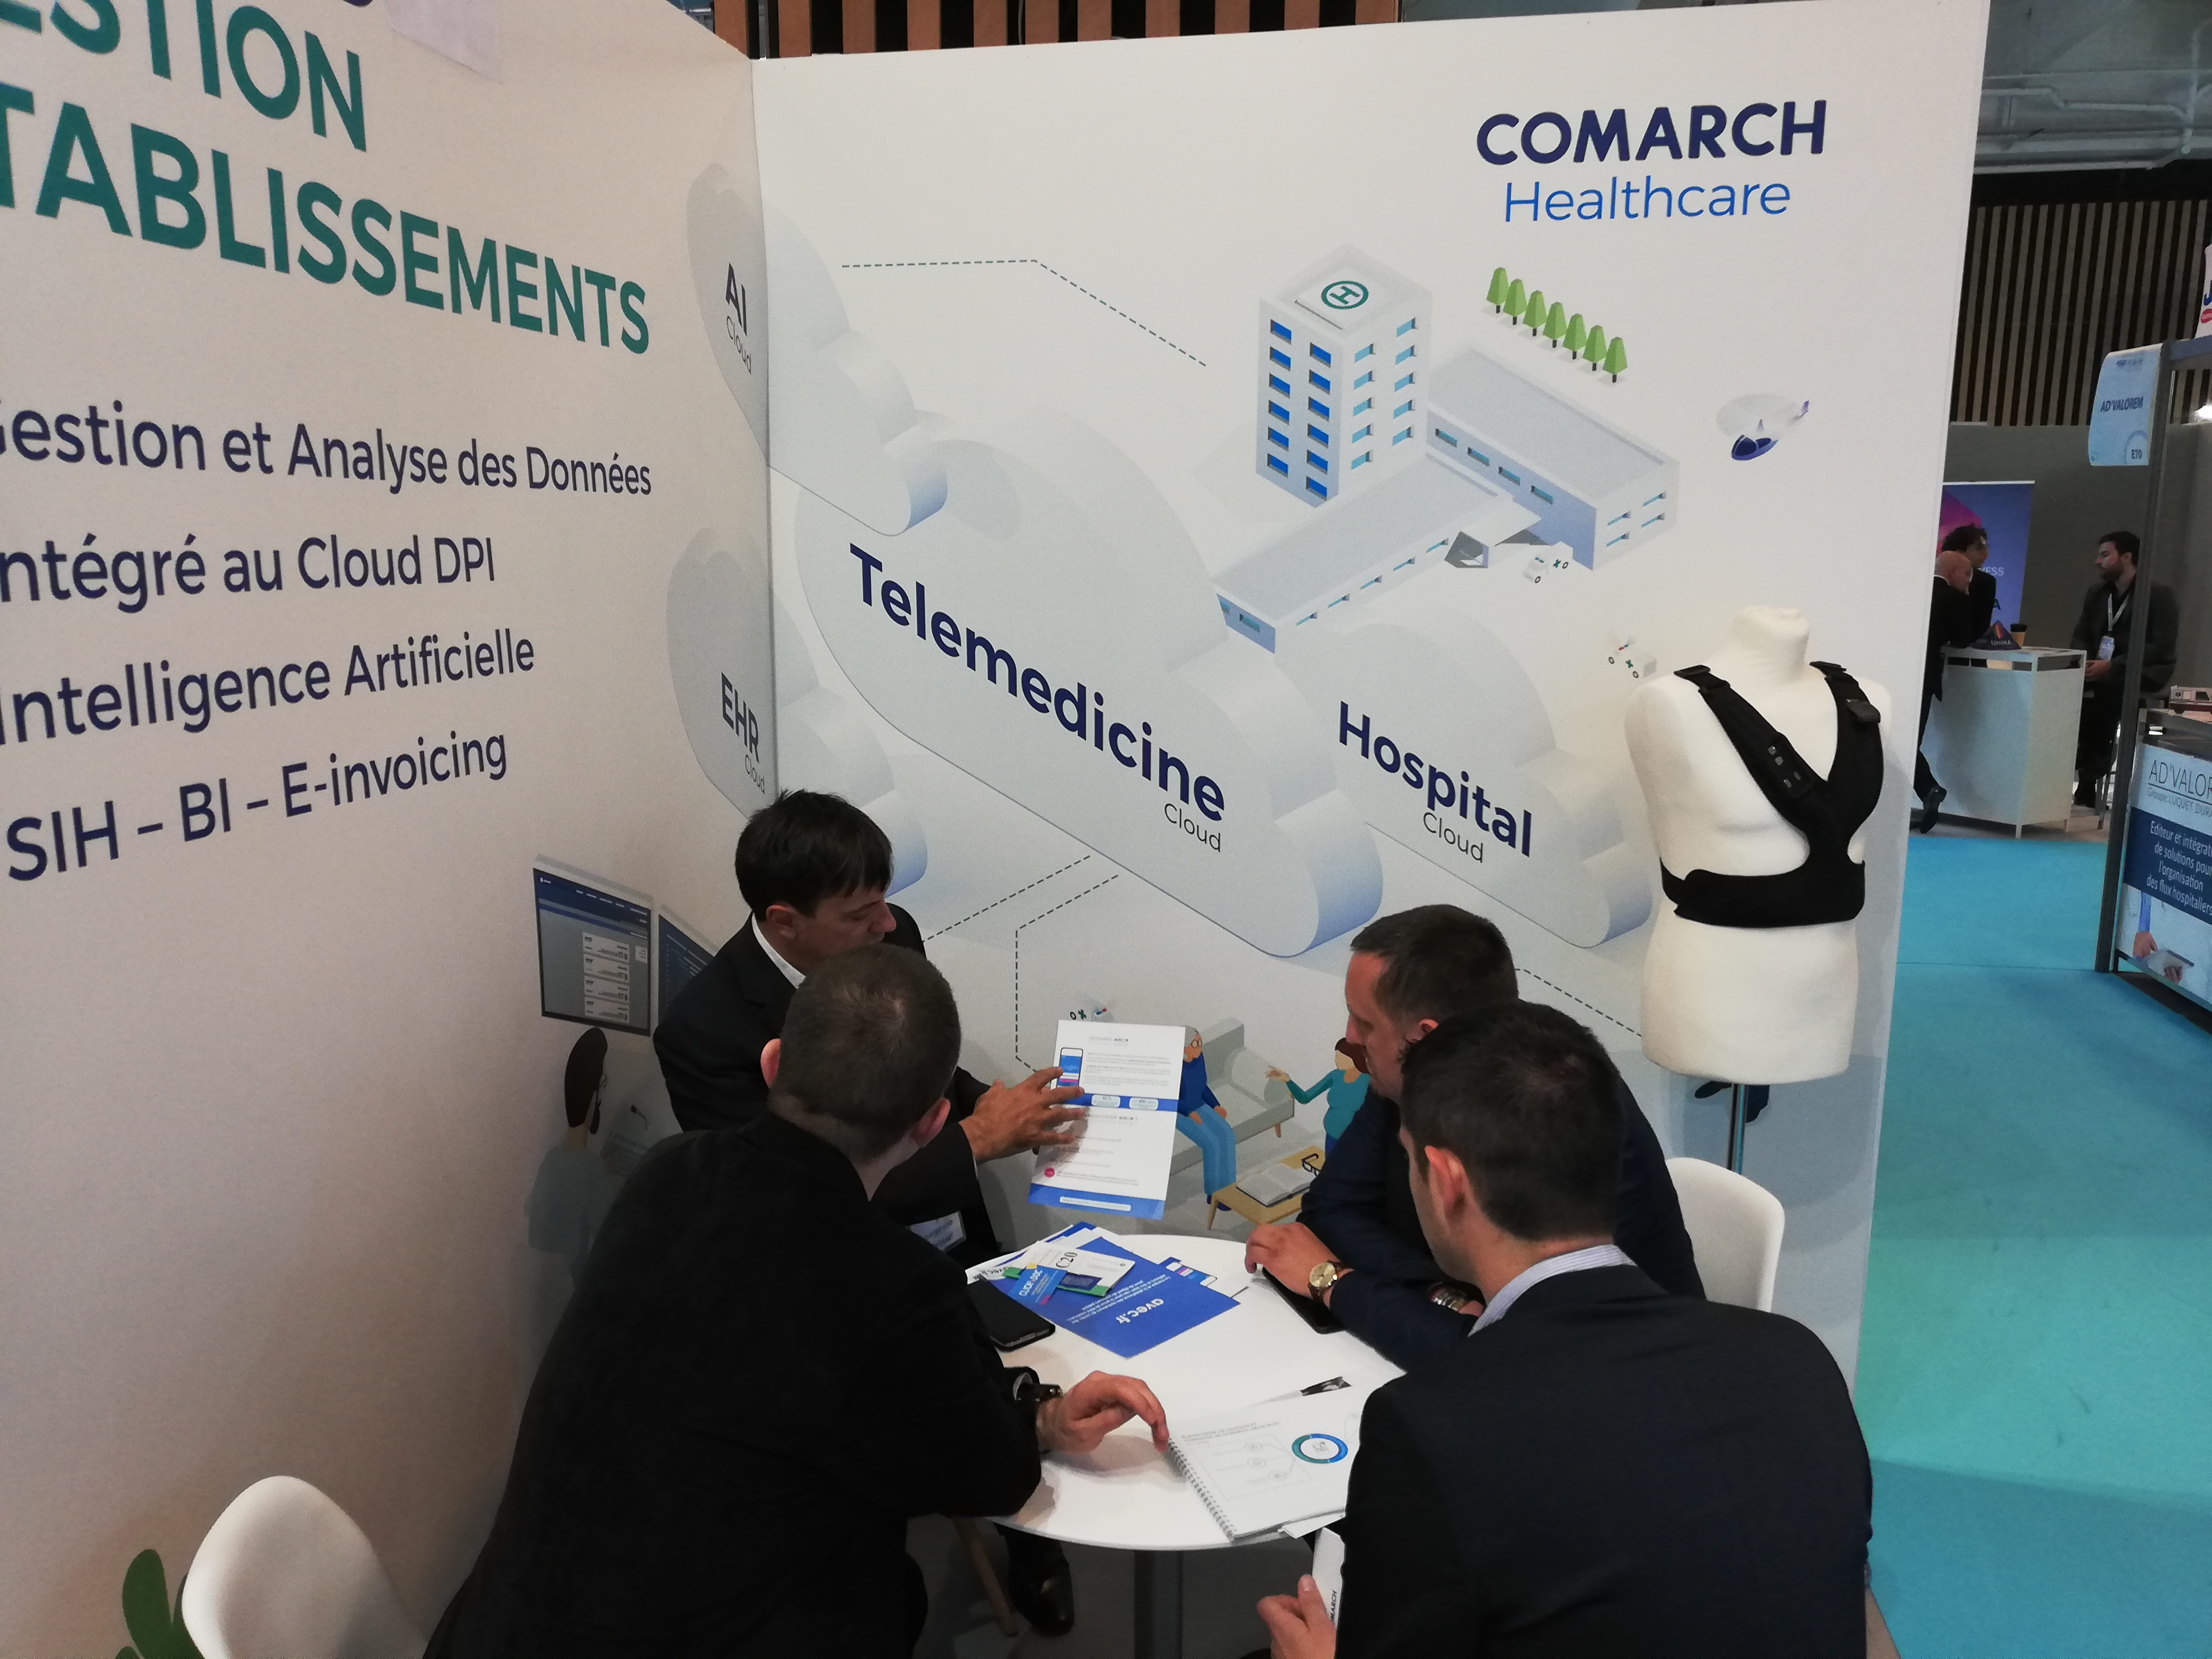 meeting stand comarch healthcare